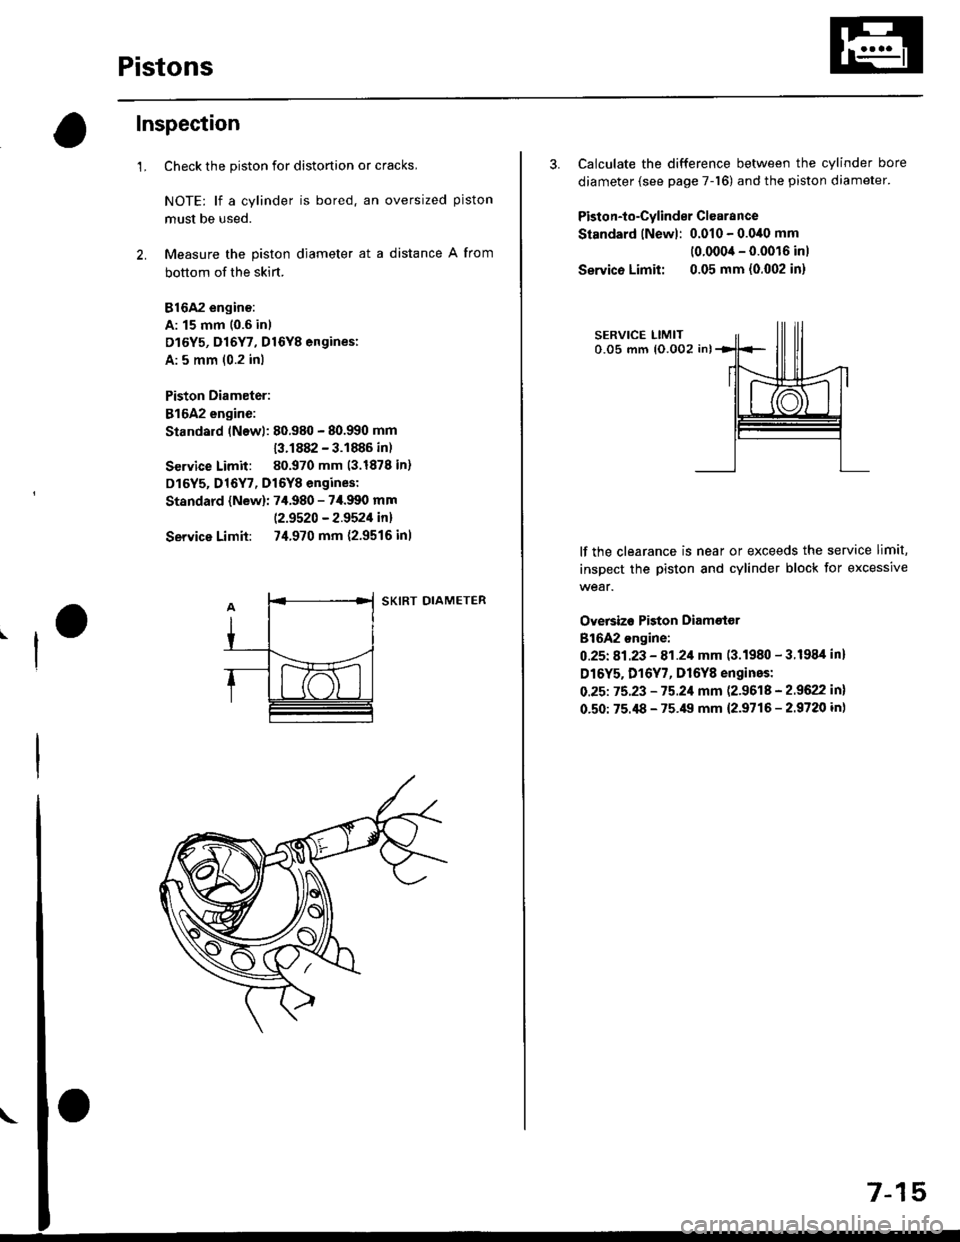 HONDA CIVIC 1996 6.G Service Manual Pistons
Inspection
1.Check the piston for distortion or cracks,
NOTE: lf a cylinder is bored. an oversized piston
must be used.
Measure the piston diameter at a distance A from
bottom of the skirt.
81